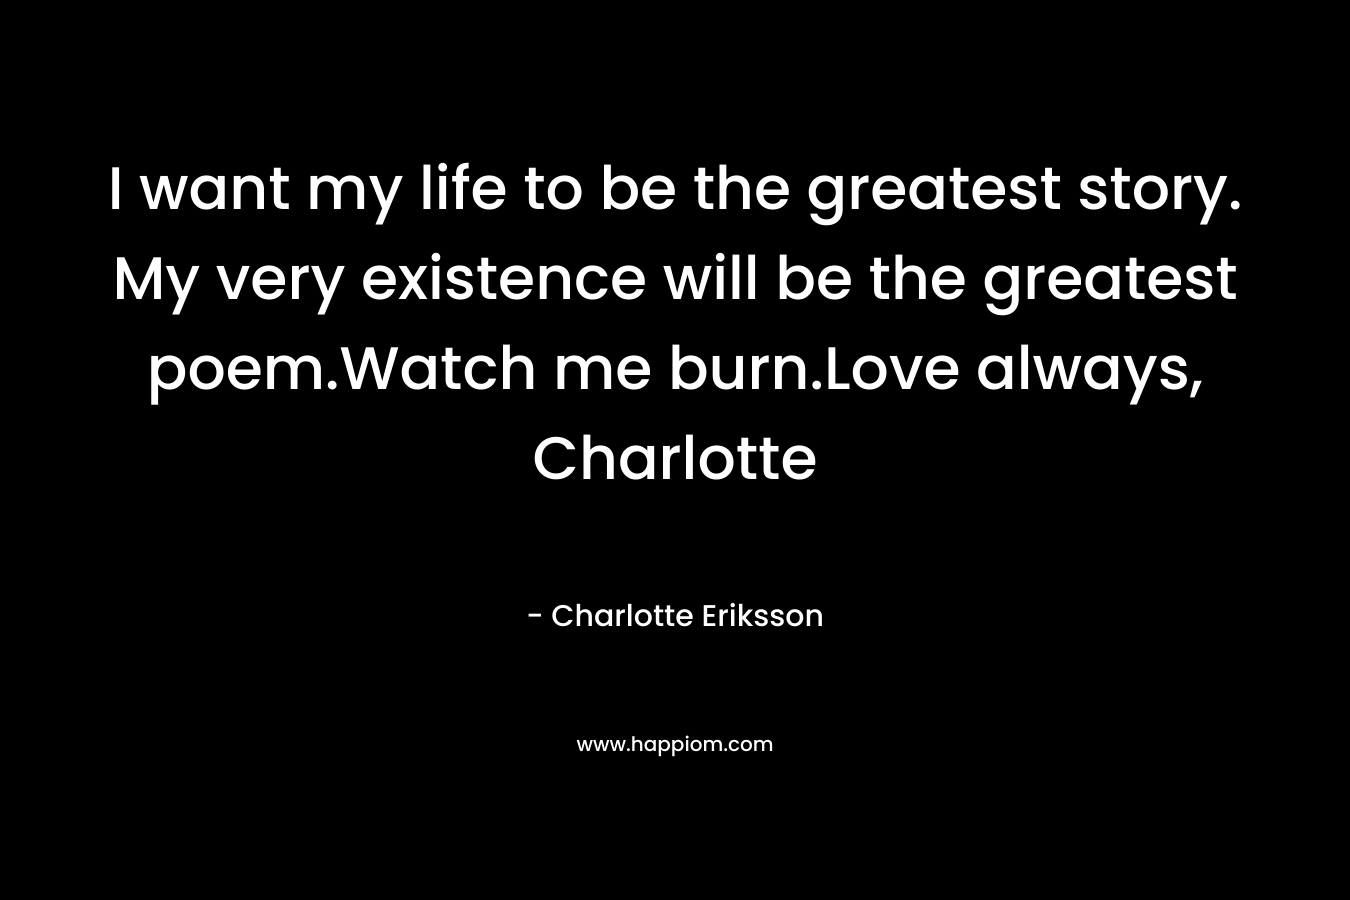 I want my life to be the greatest story. My very existence will be the greatest poem.Watch me burn.Love always, Charlotte